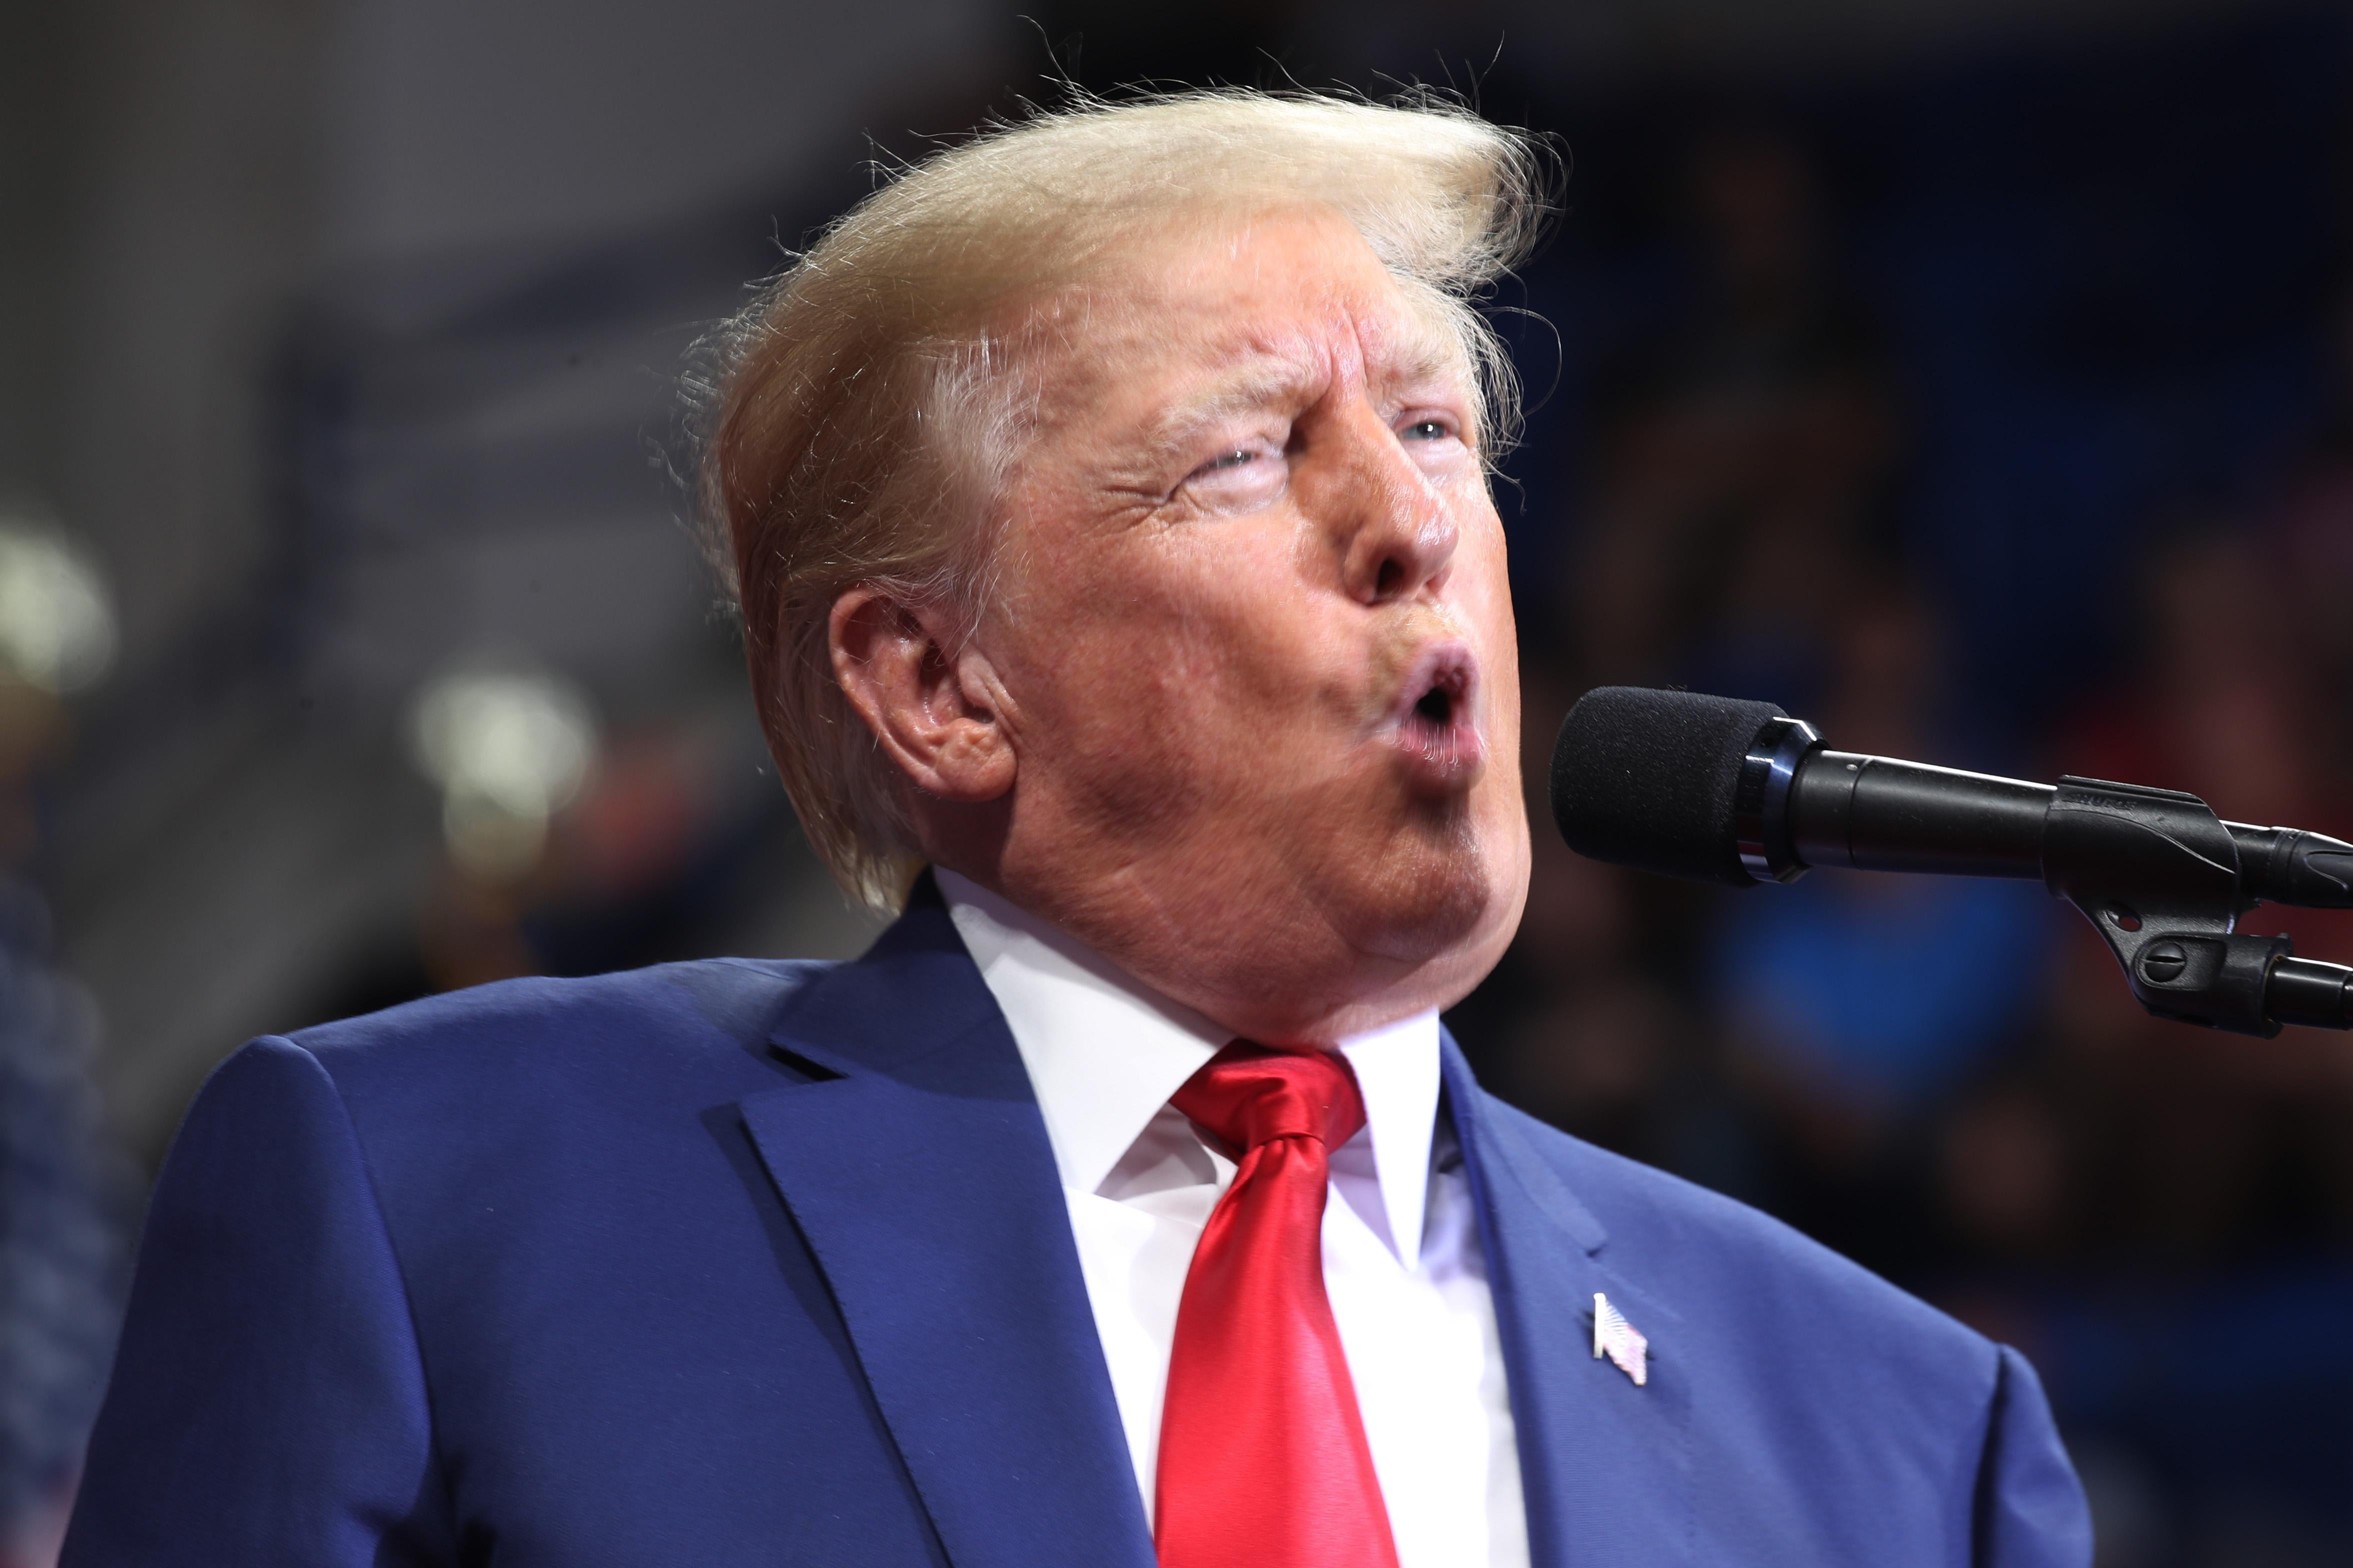 Trump with his mouth open.